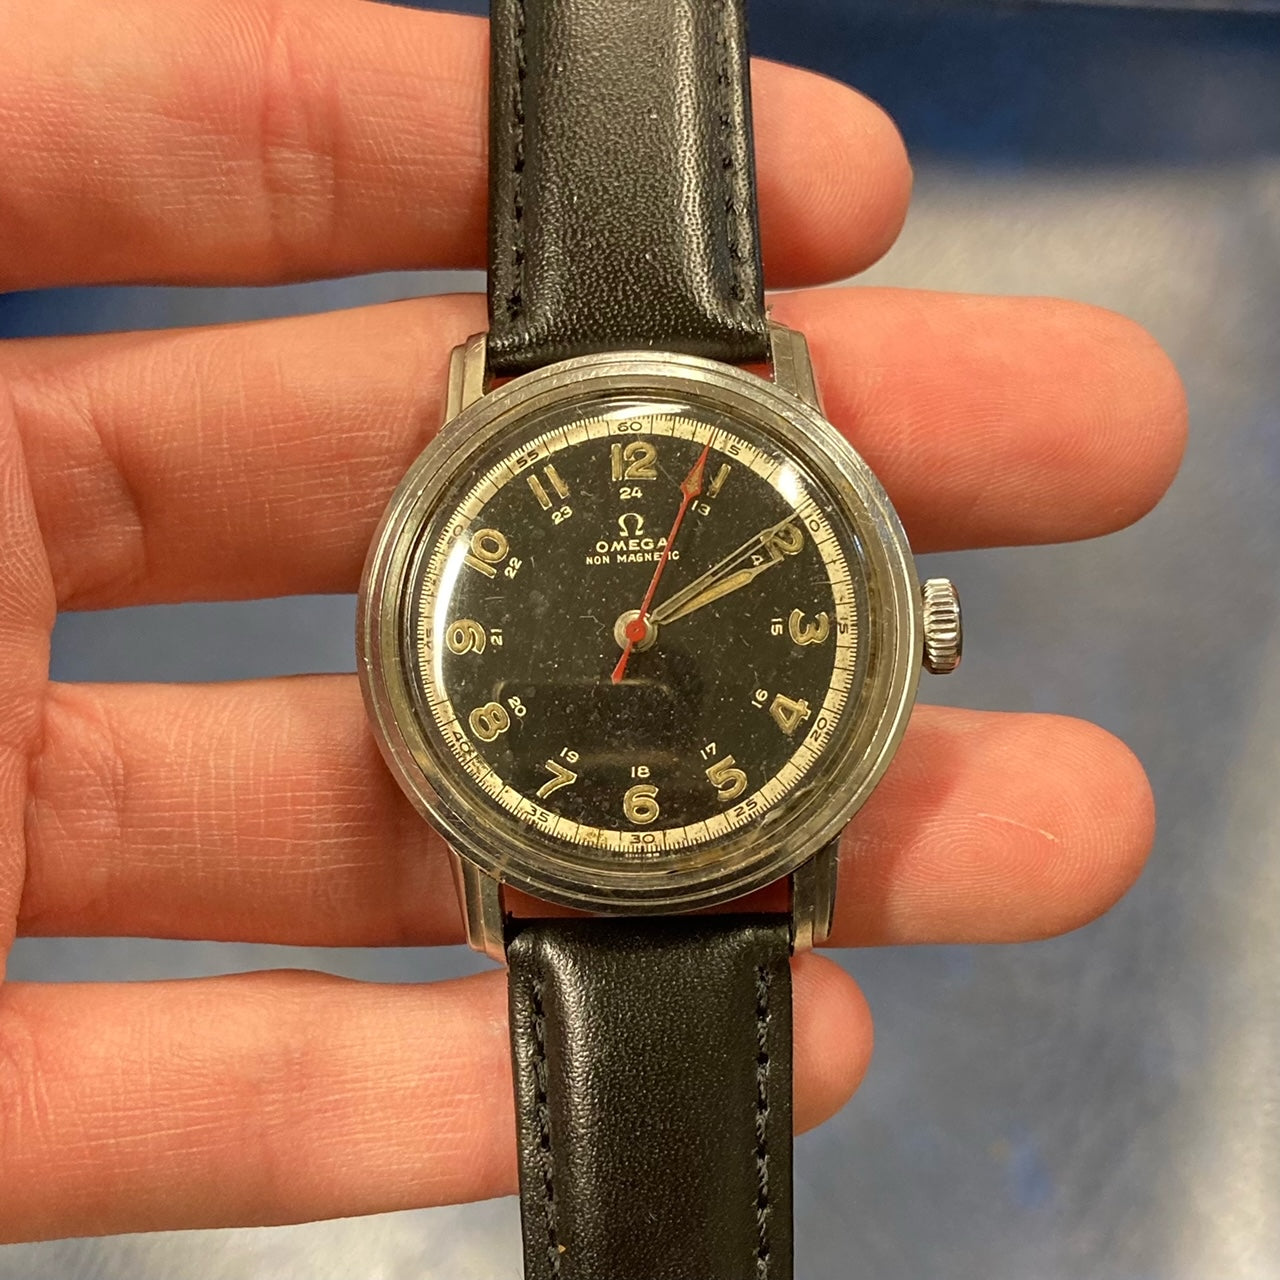 Vintage Omega Non Magnetic WW2 Military Watch - 2254